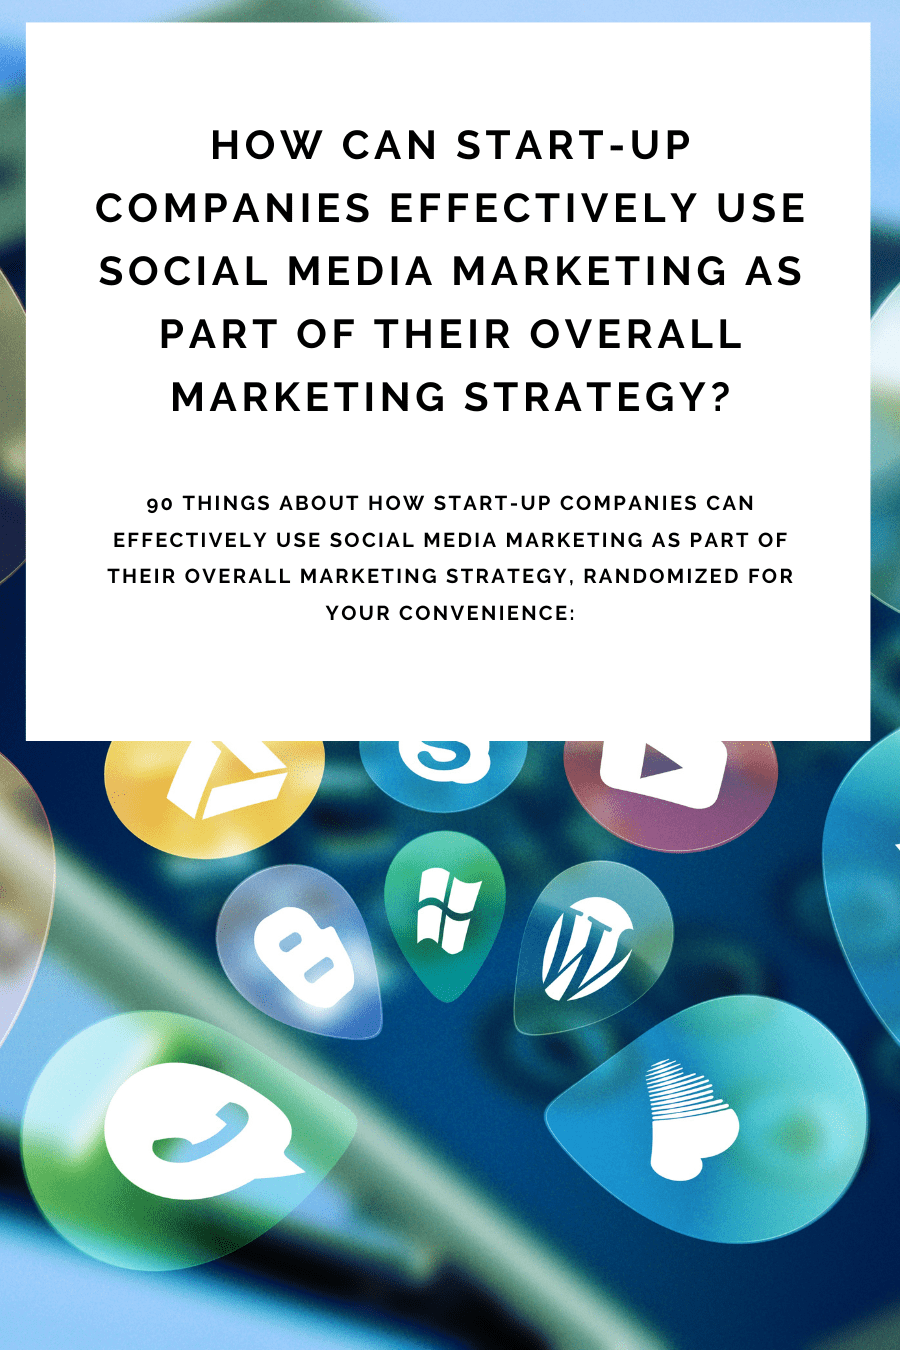 How can start-up companies effectively use social media marketing as part of their overall marketing strategy?